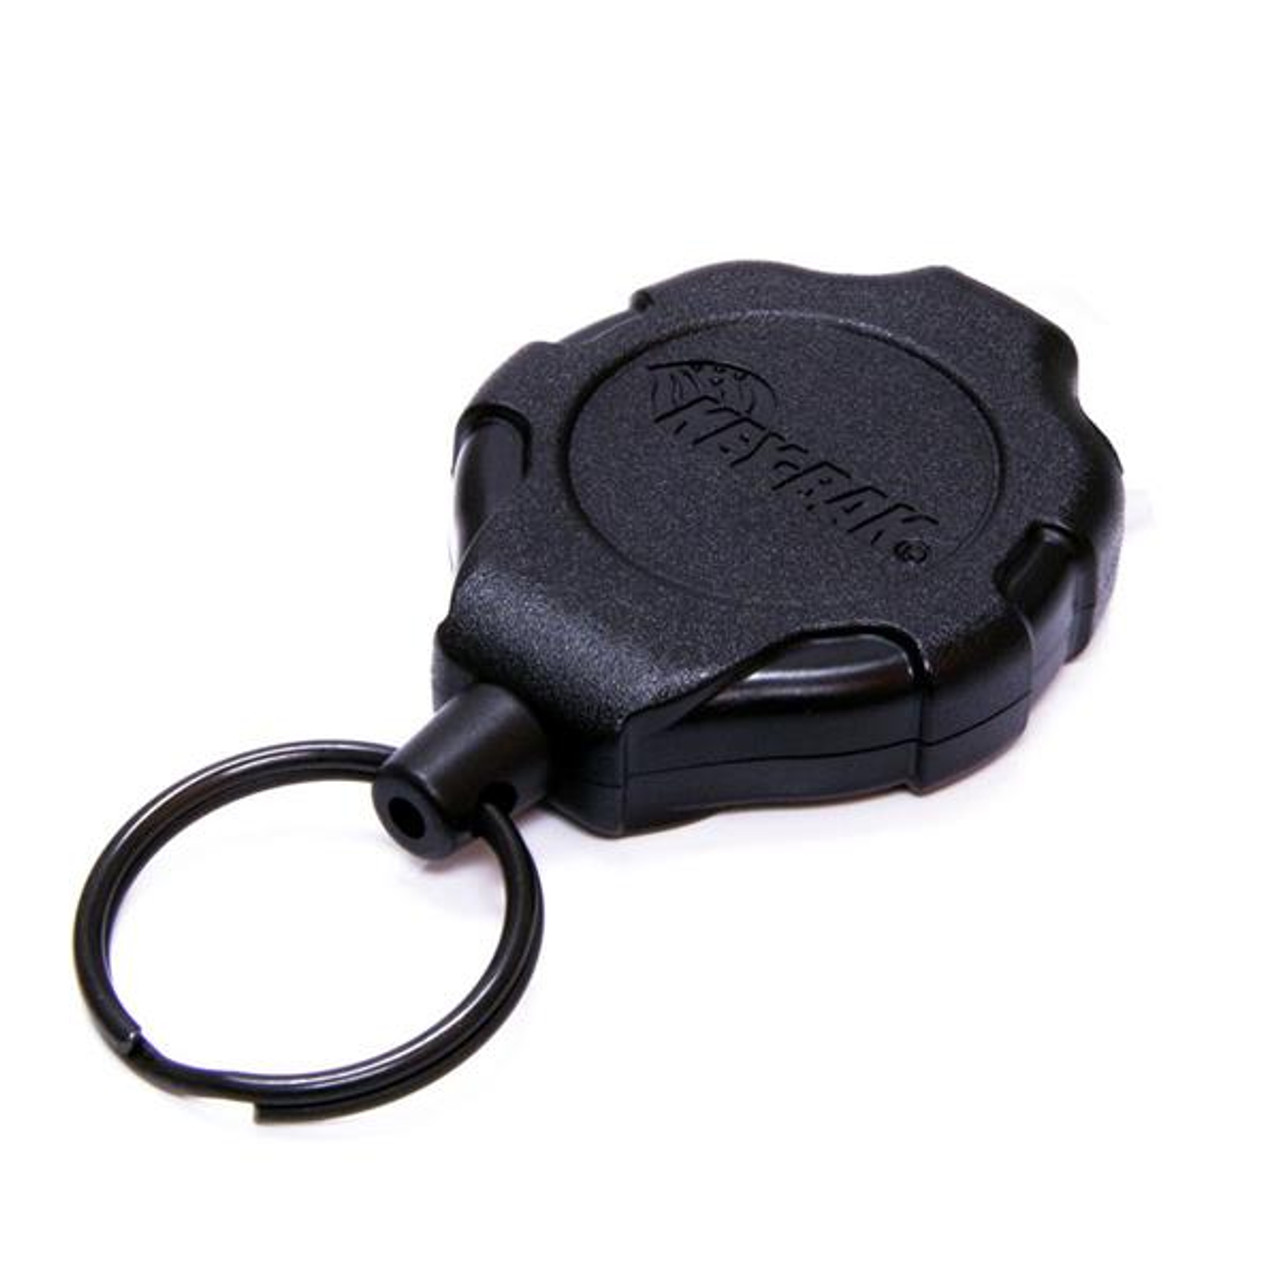 Heavy Duty Metal Retractable Badge Holder Reel with Belt Clip Key Ring  Extra Carabiner Strong Dyneema Pull Cord